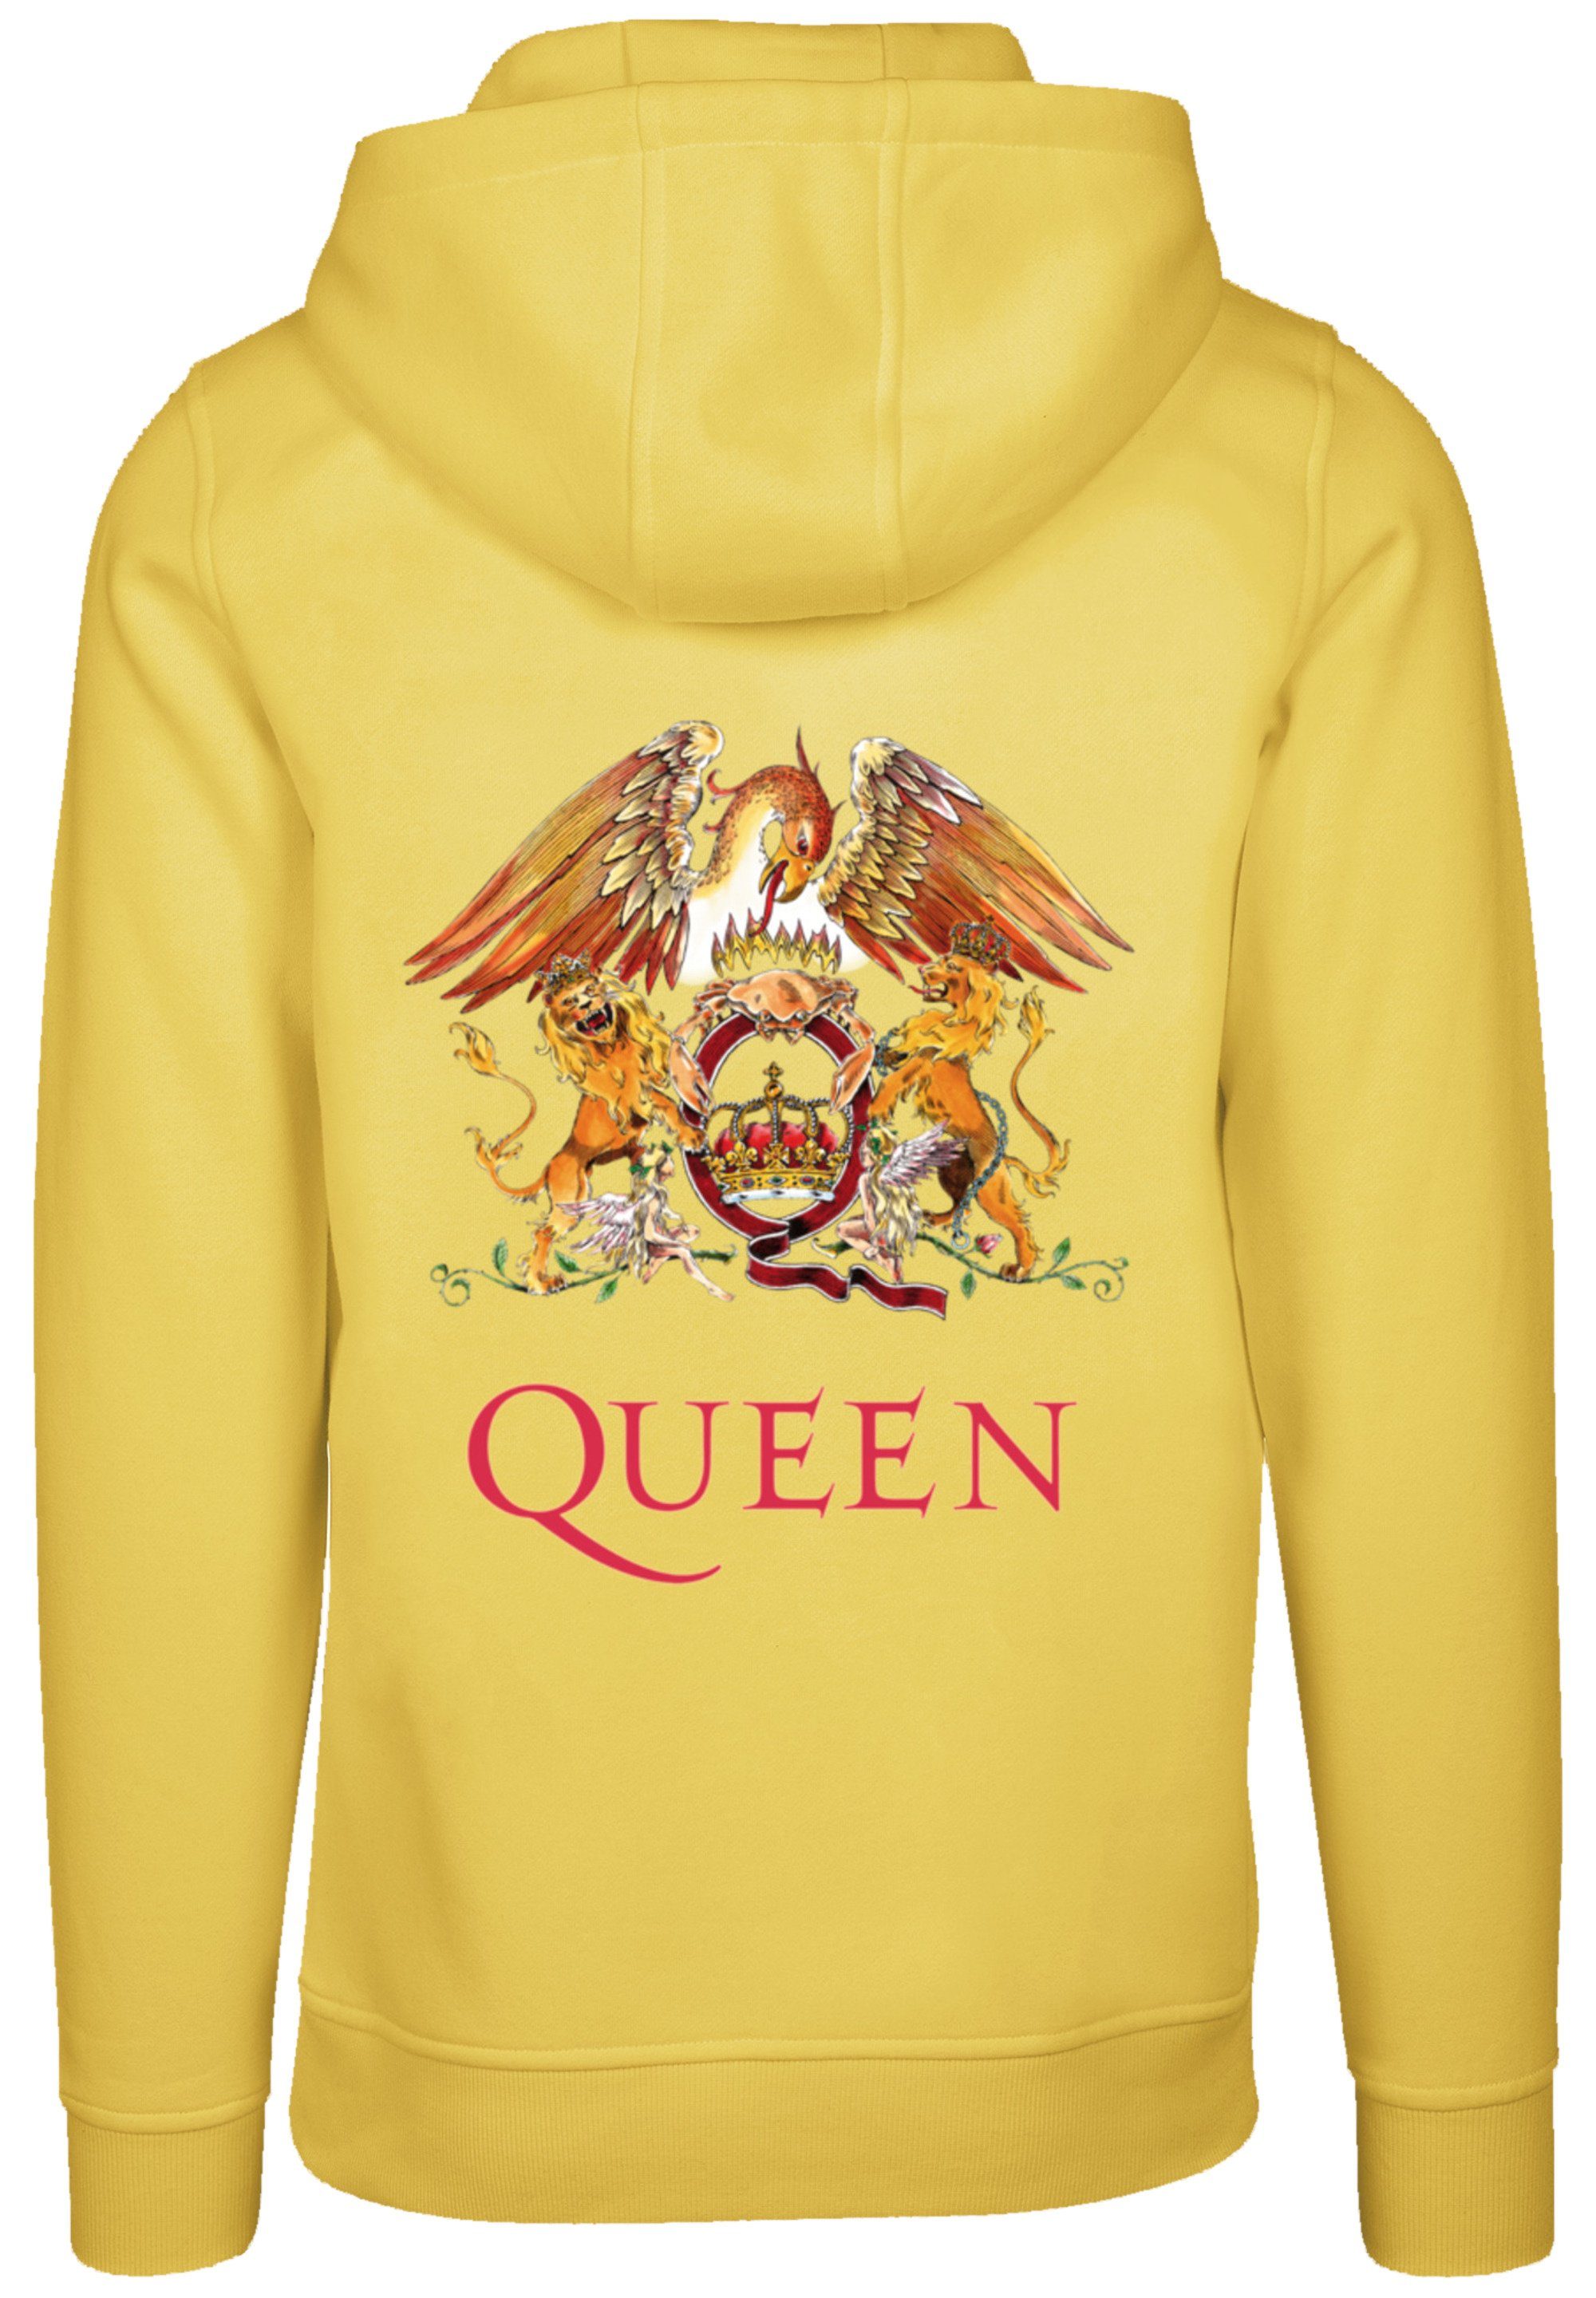 yellow Hoodie, Kapuzenpullover Musik F4NT4STIC Band Classic taxi Queen Warm, Rock Bequem Logo